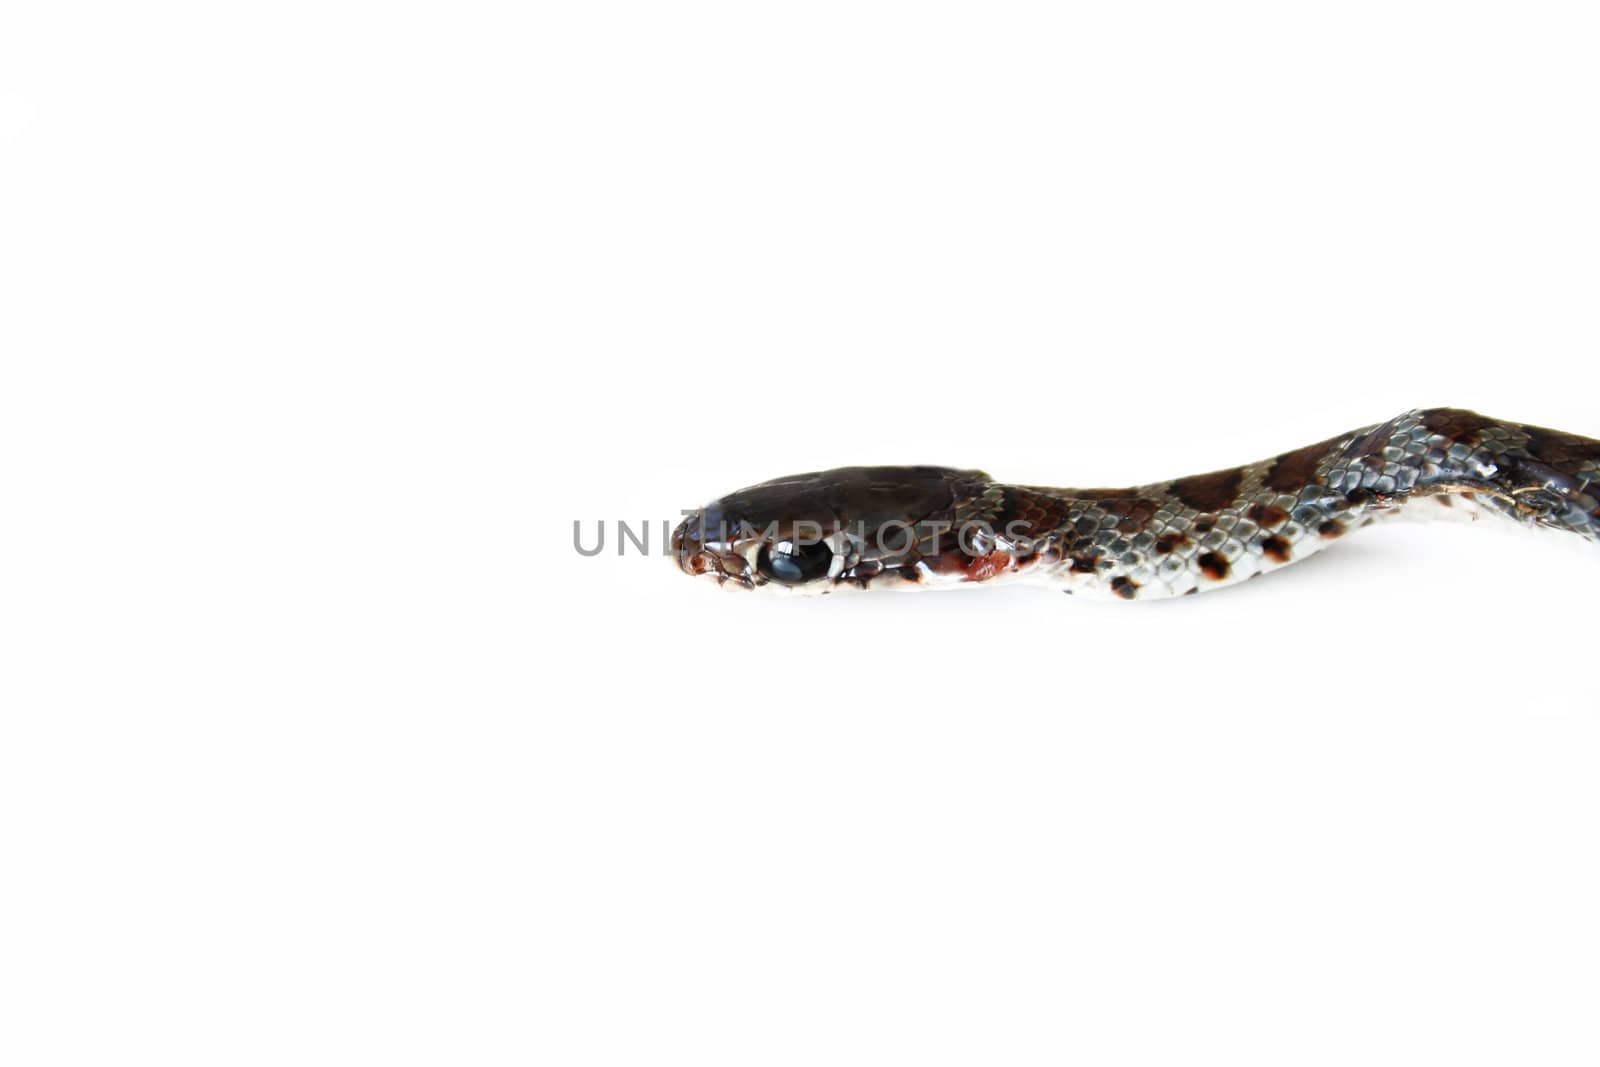 A snake isolated on a white background.